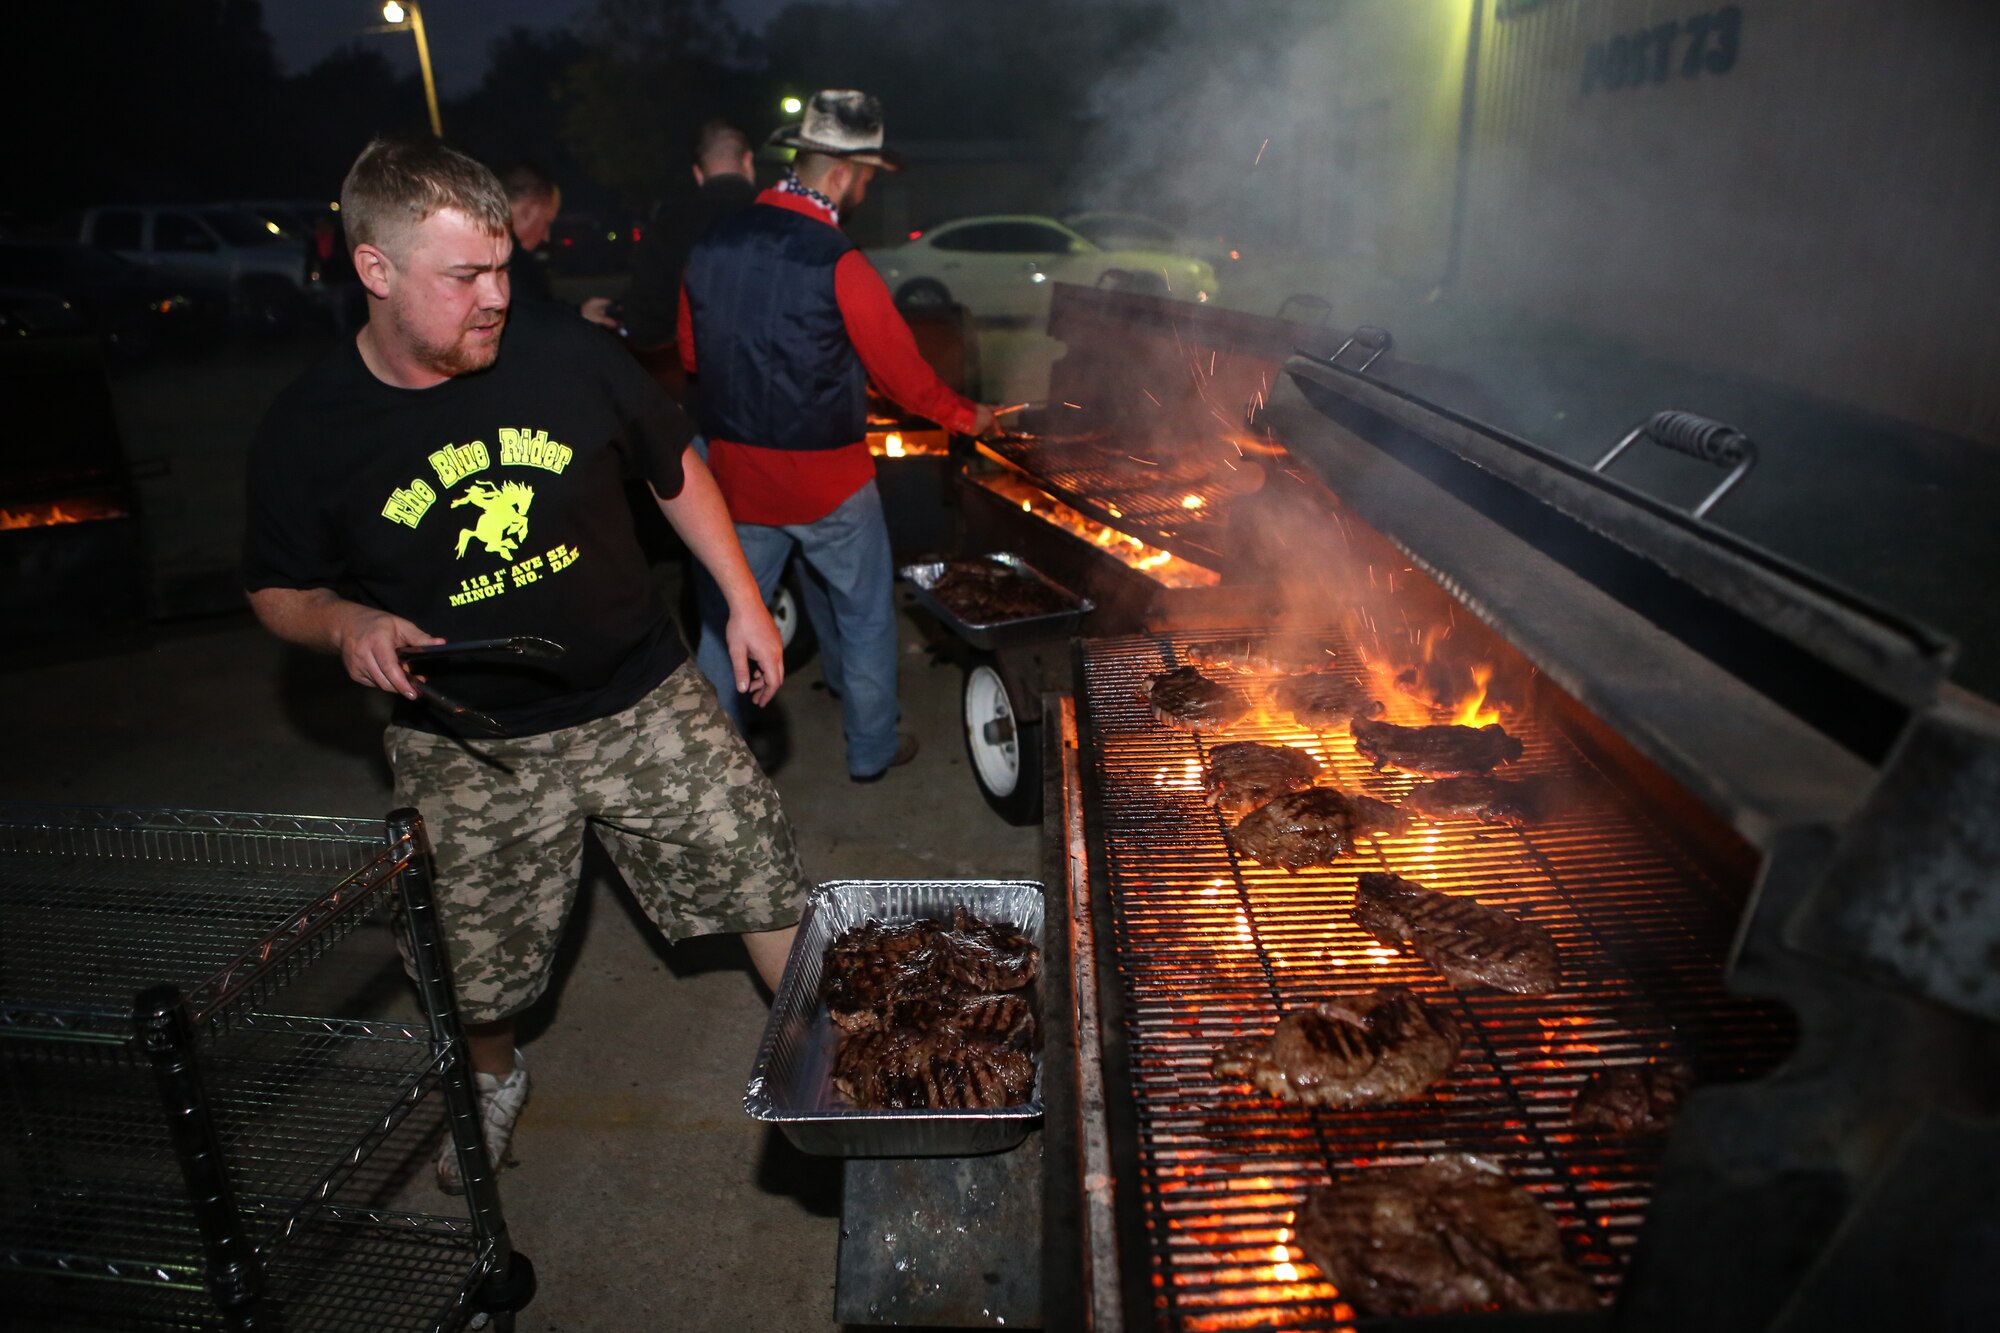 Adam Hawkins, a volunteer for Operation Holiday Spirit, watches the grill on November 1 while serving dinner to the more than 350 fundraiser attendees at the Del City American Legion. OHS is a non-profit organization that raises support for local Reserve and Guard Airmen in need. (U.S. Air Force photo/Staff Sgt. Caleb Wanzer)